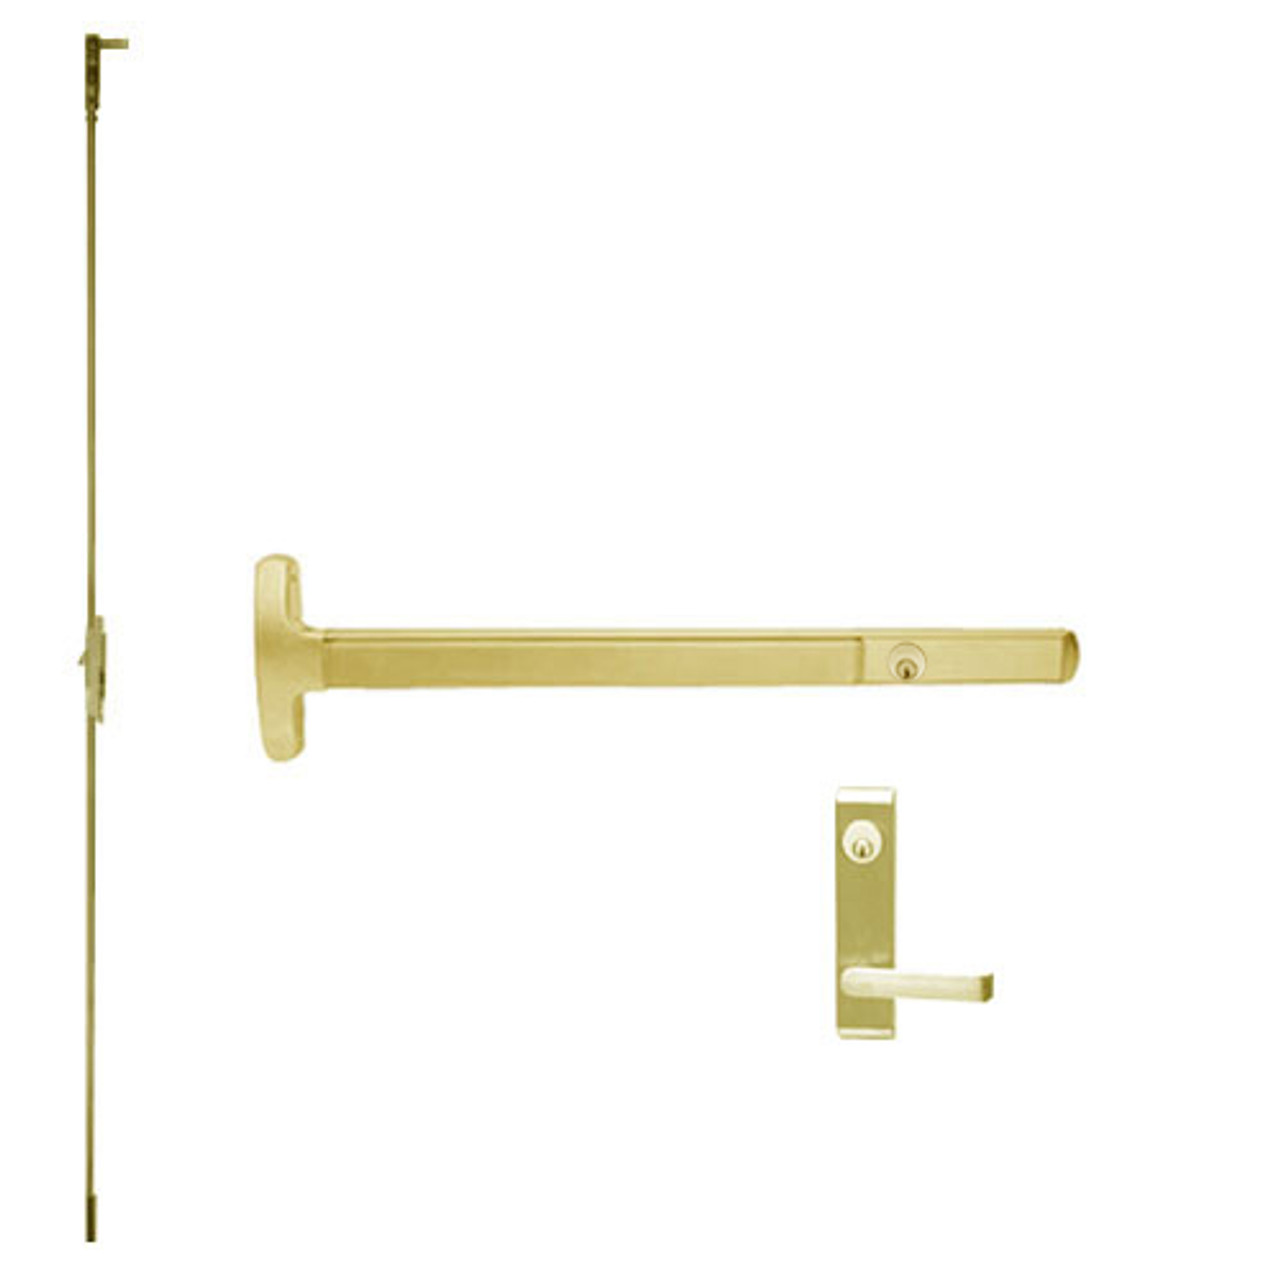 CD24-C-L-NL-DANE-US3-3-LHR Falcon Exit Device in Polished Brass